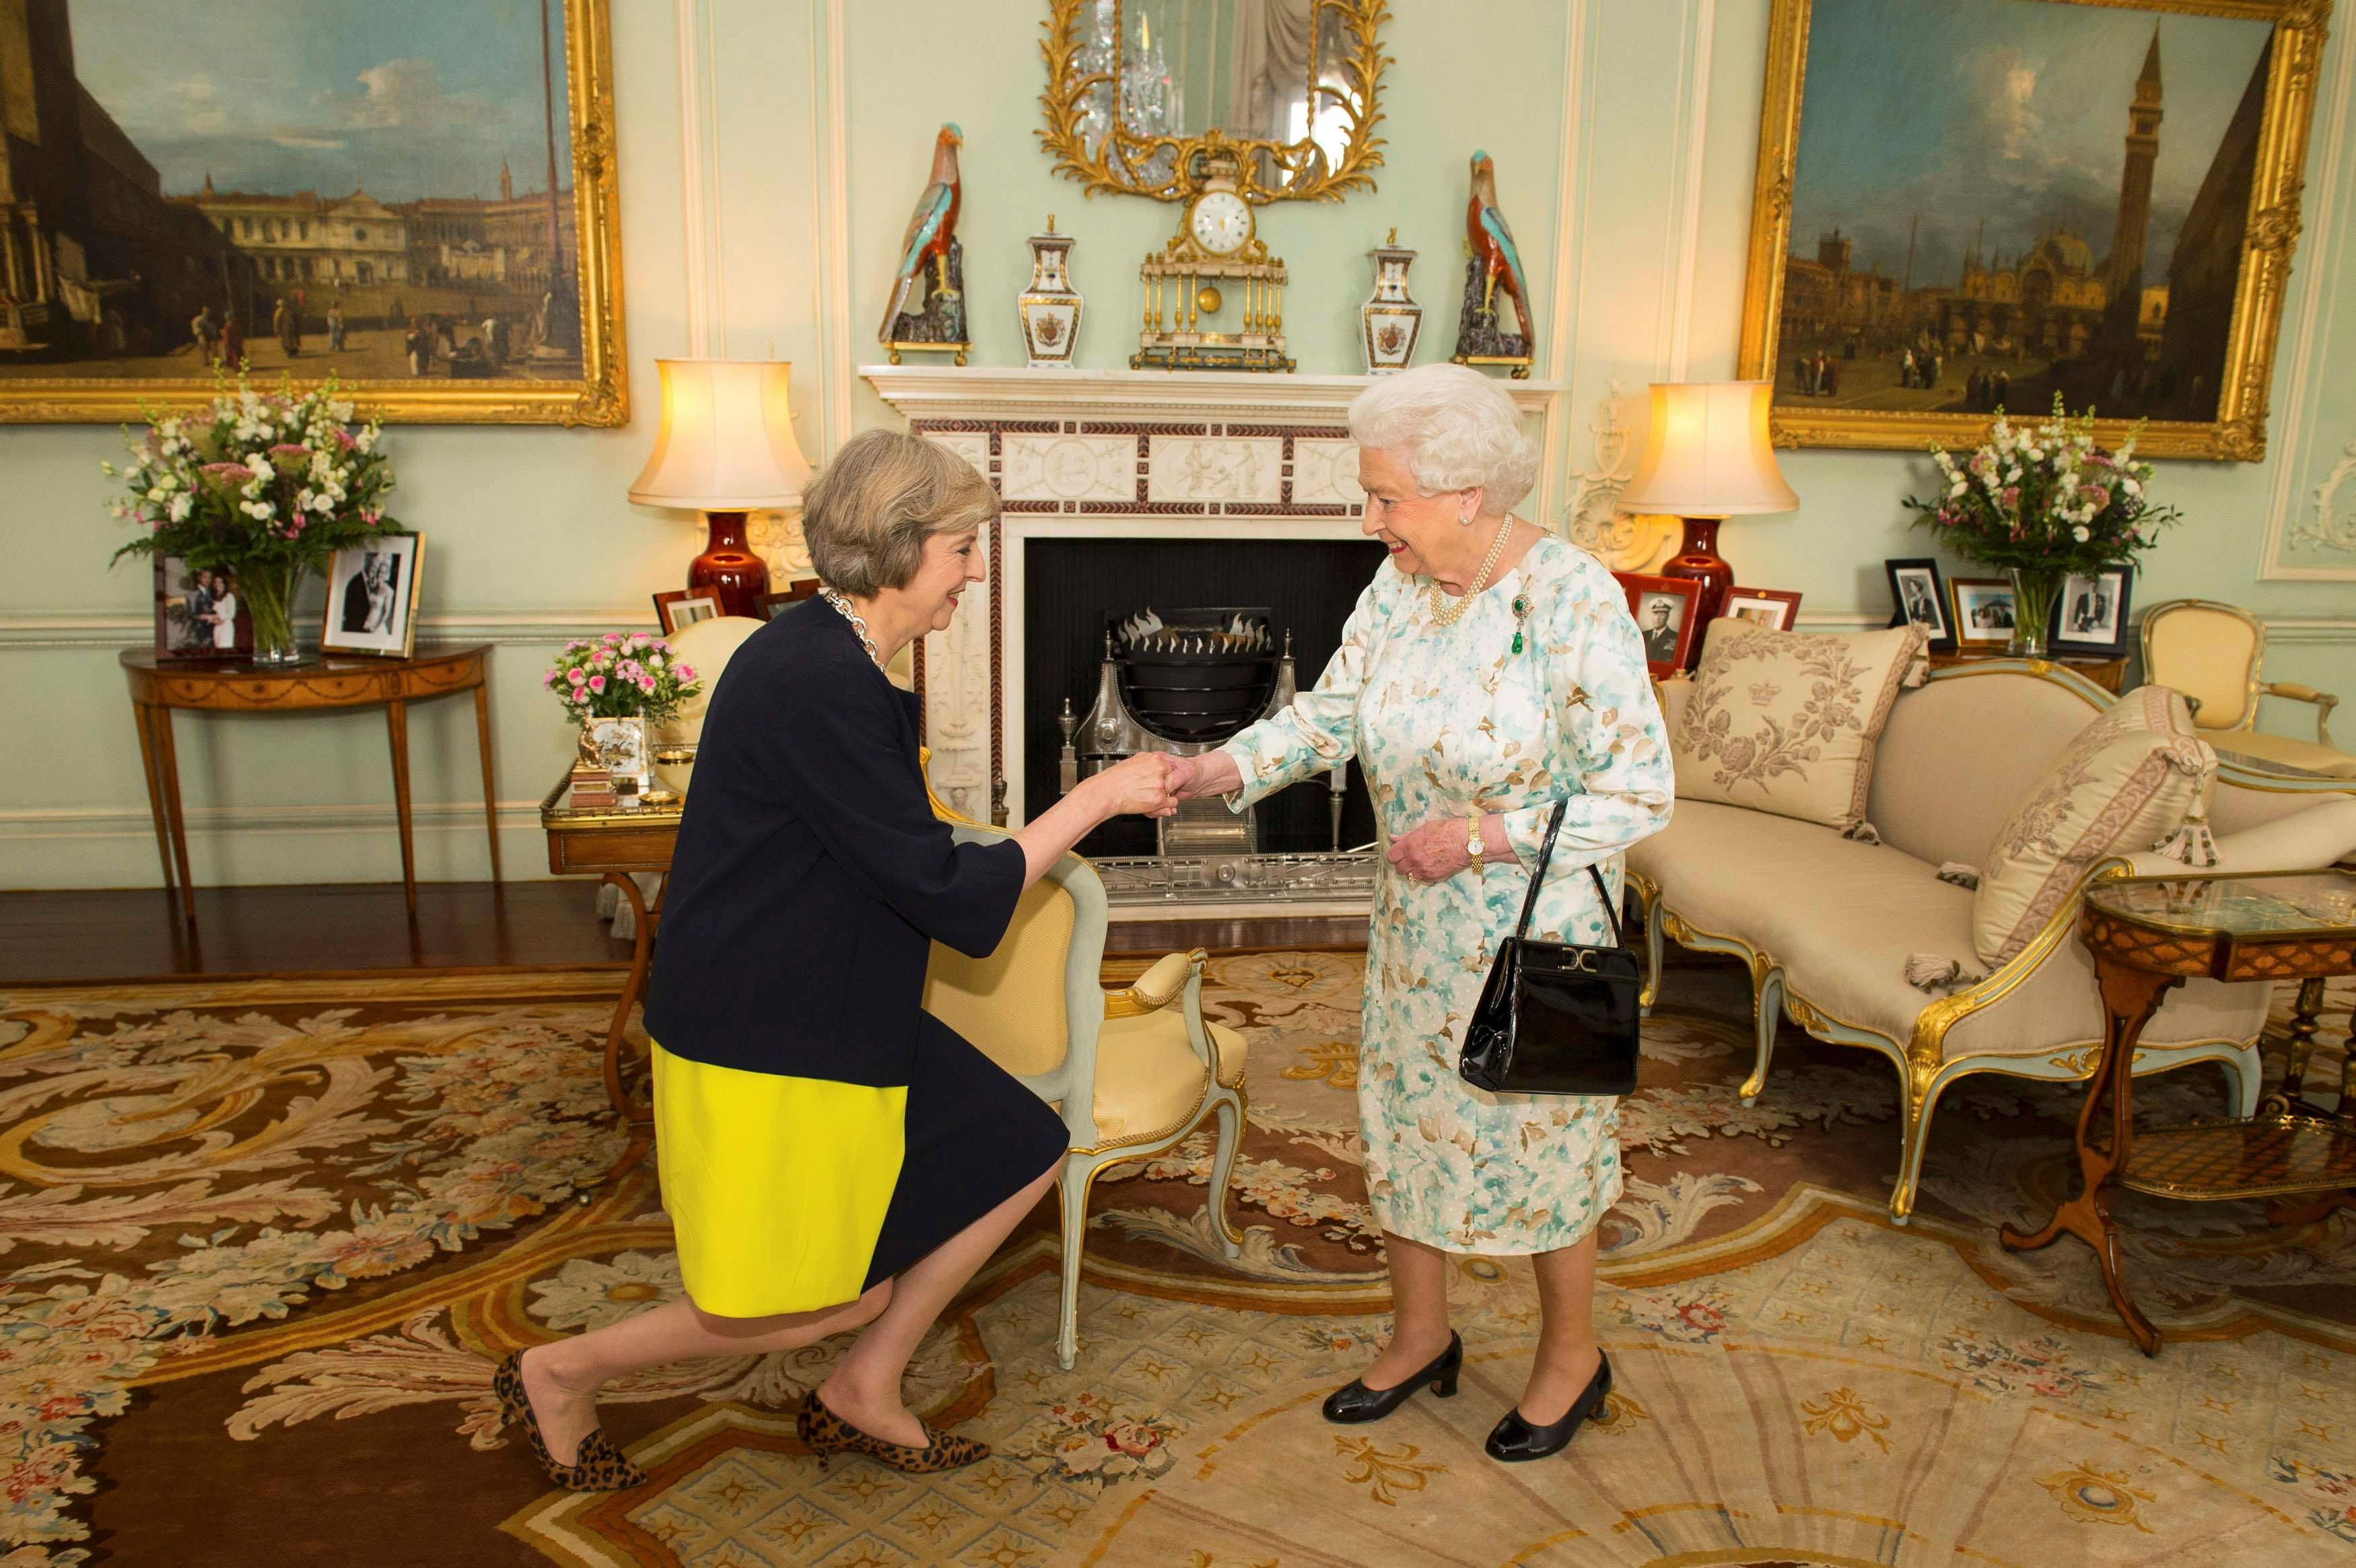 Britain's Queen Elizabeth welcomes Theresa May at the start of an audience in Buckingham Palace, whe